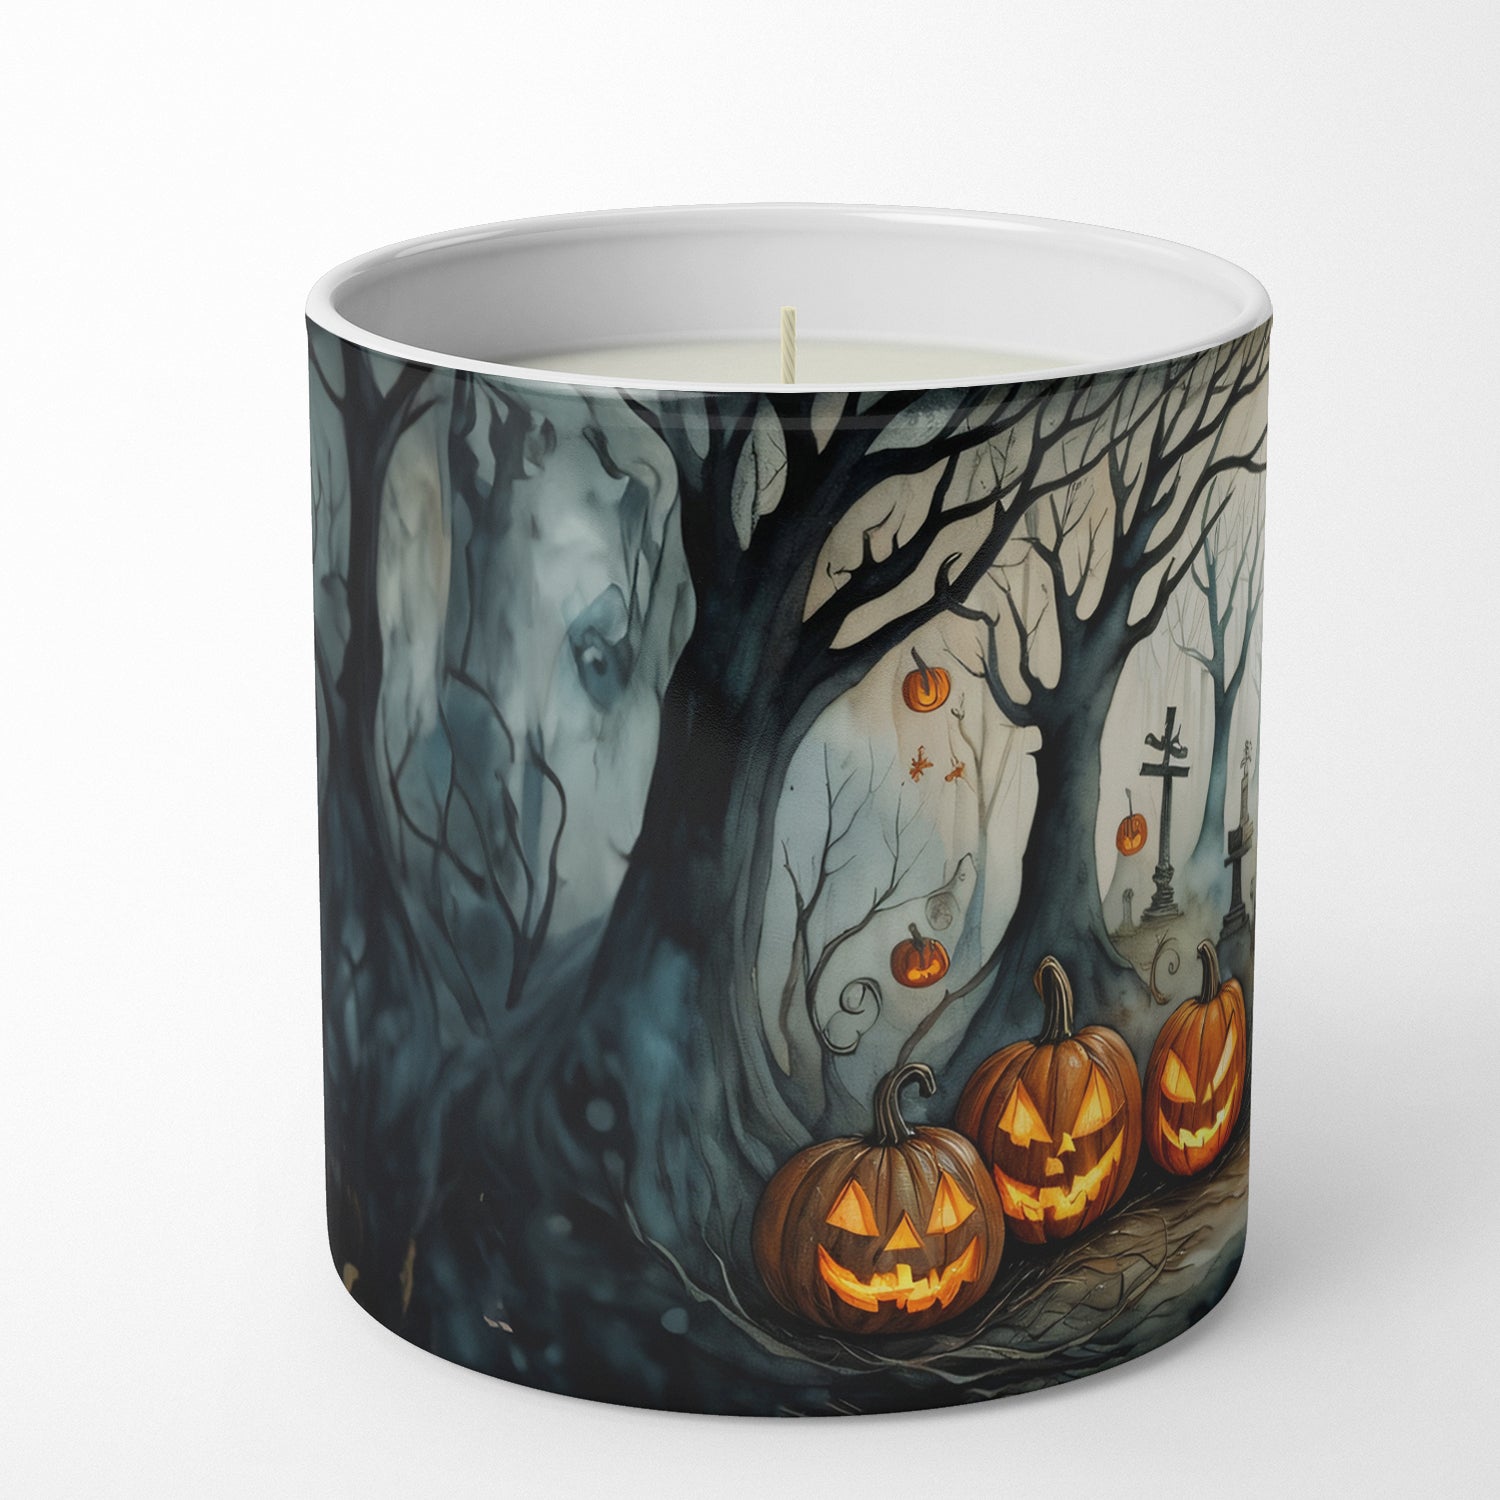 The Weeping Woman Spooky Halloween Decorative Soy Candle